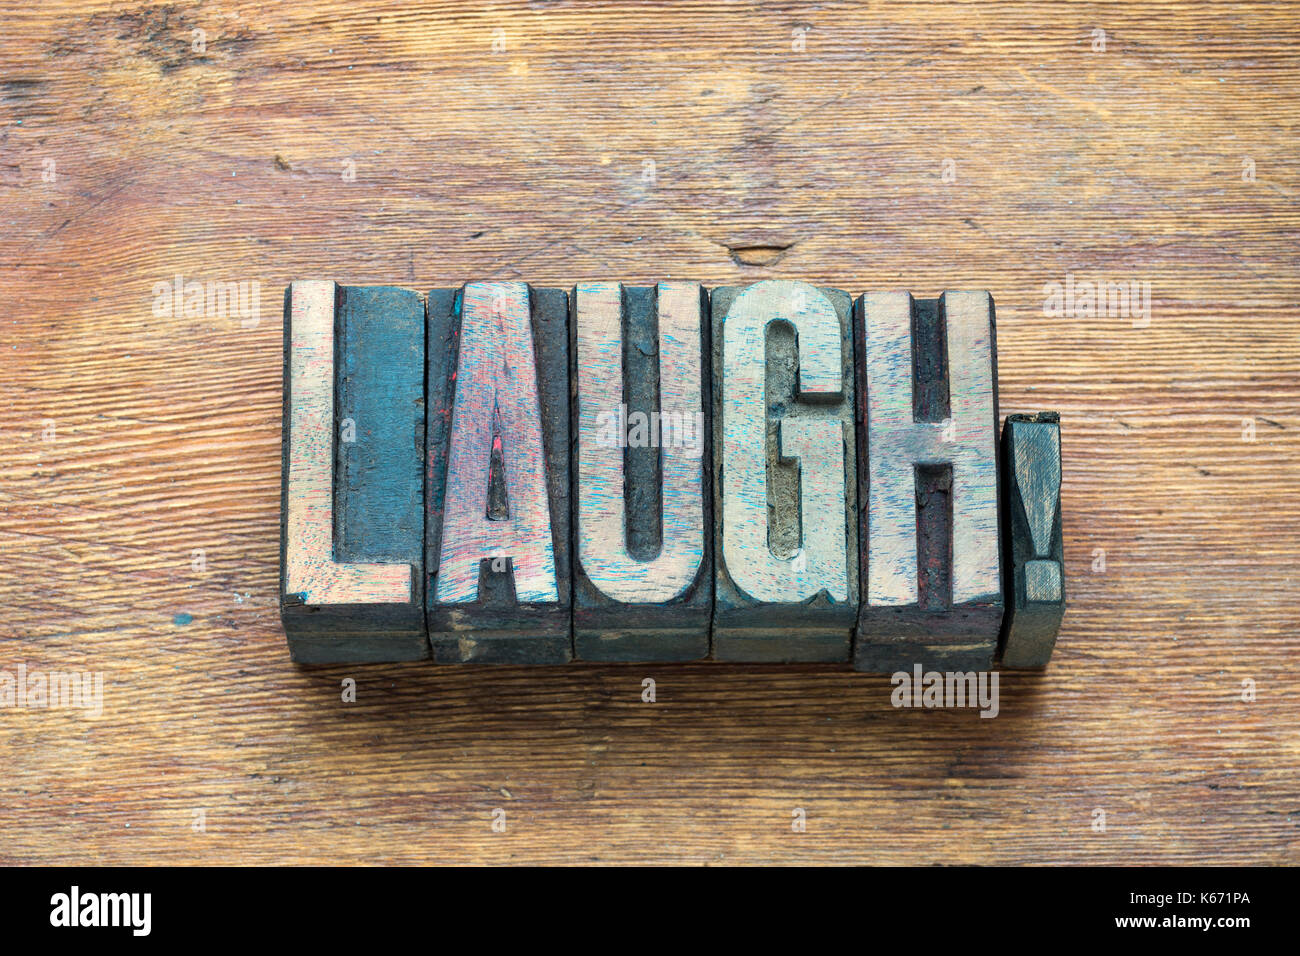 laugh word made from wooden letterpress type on grunge wood Stock Photo